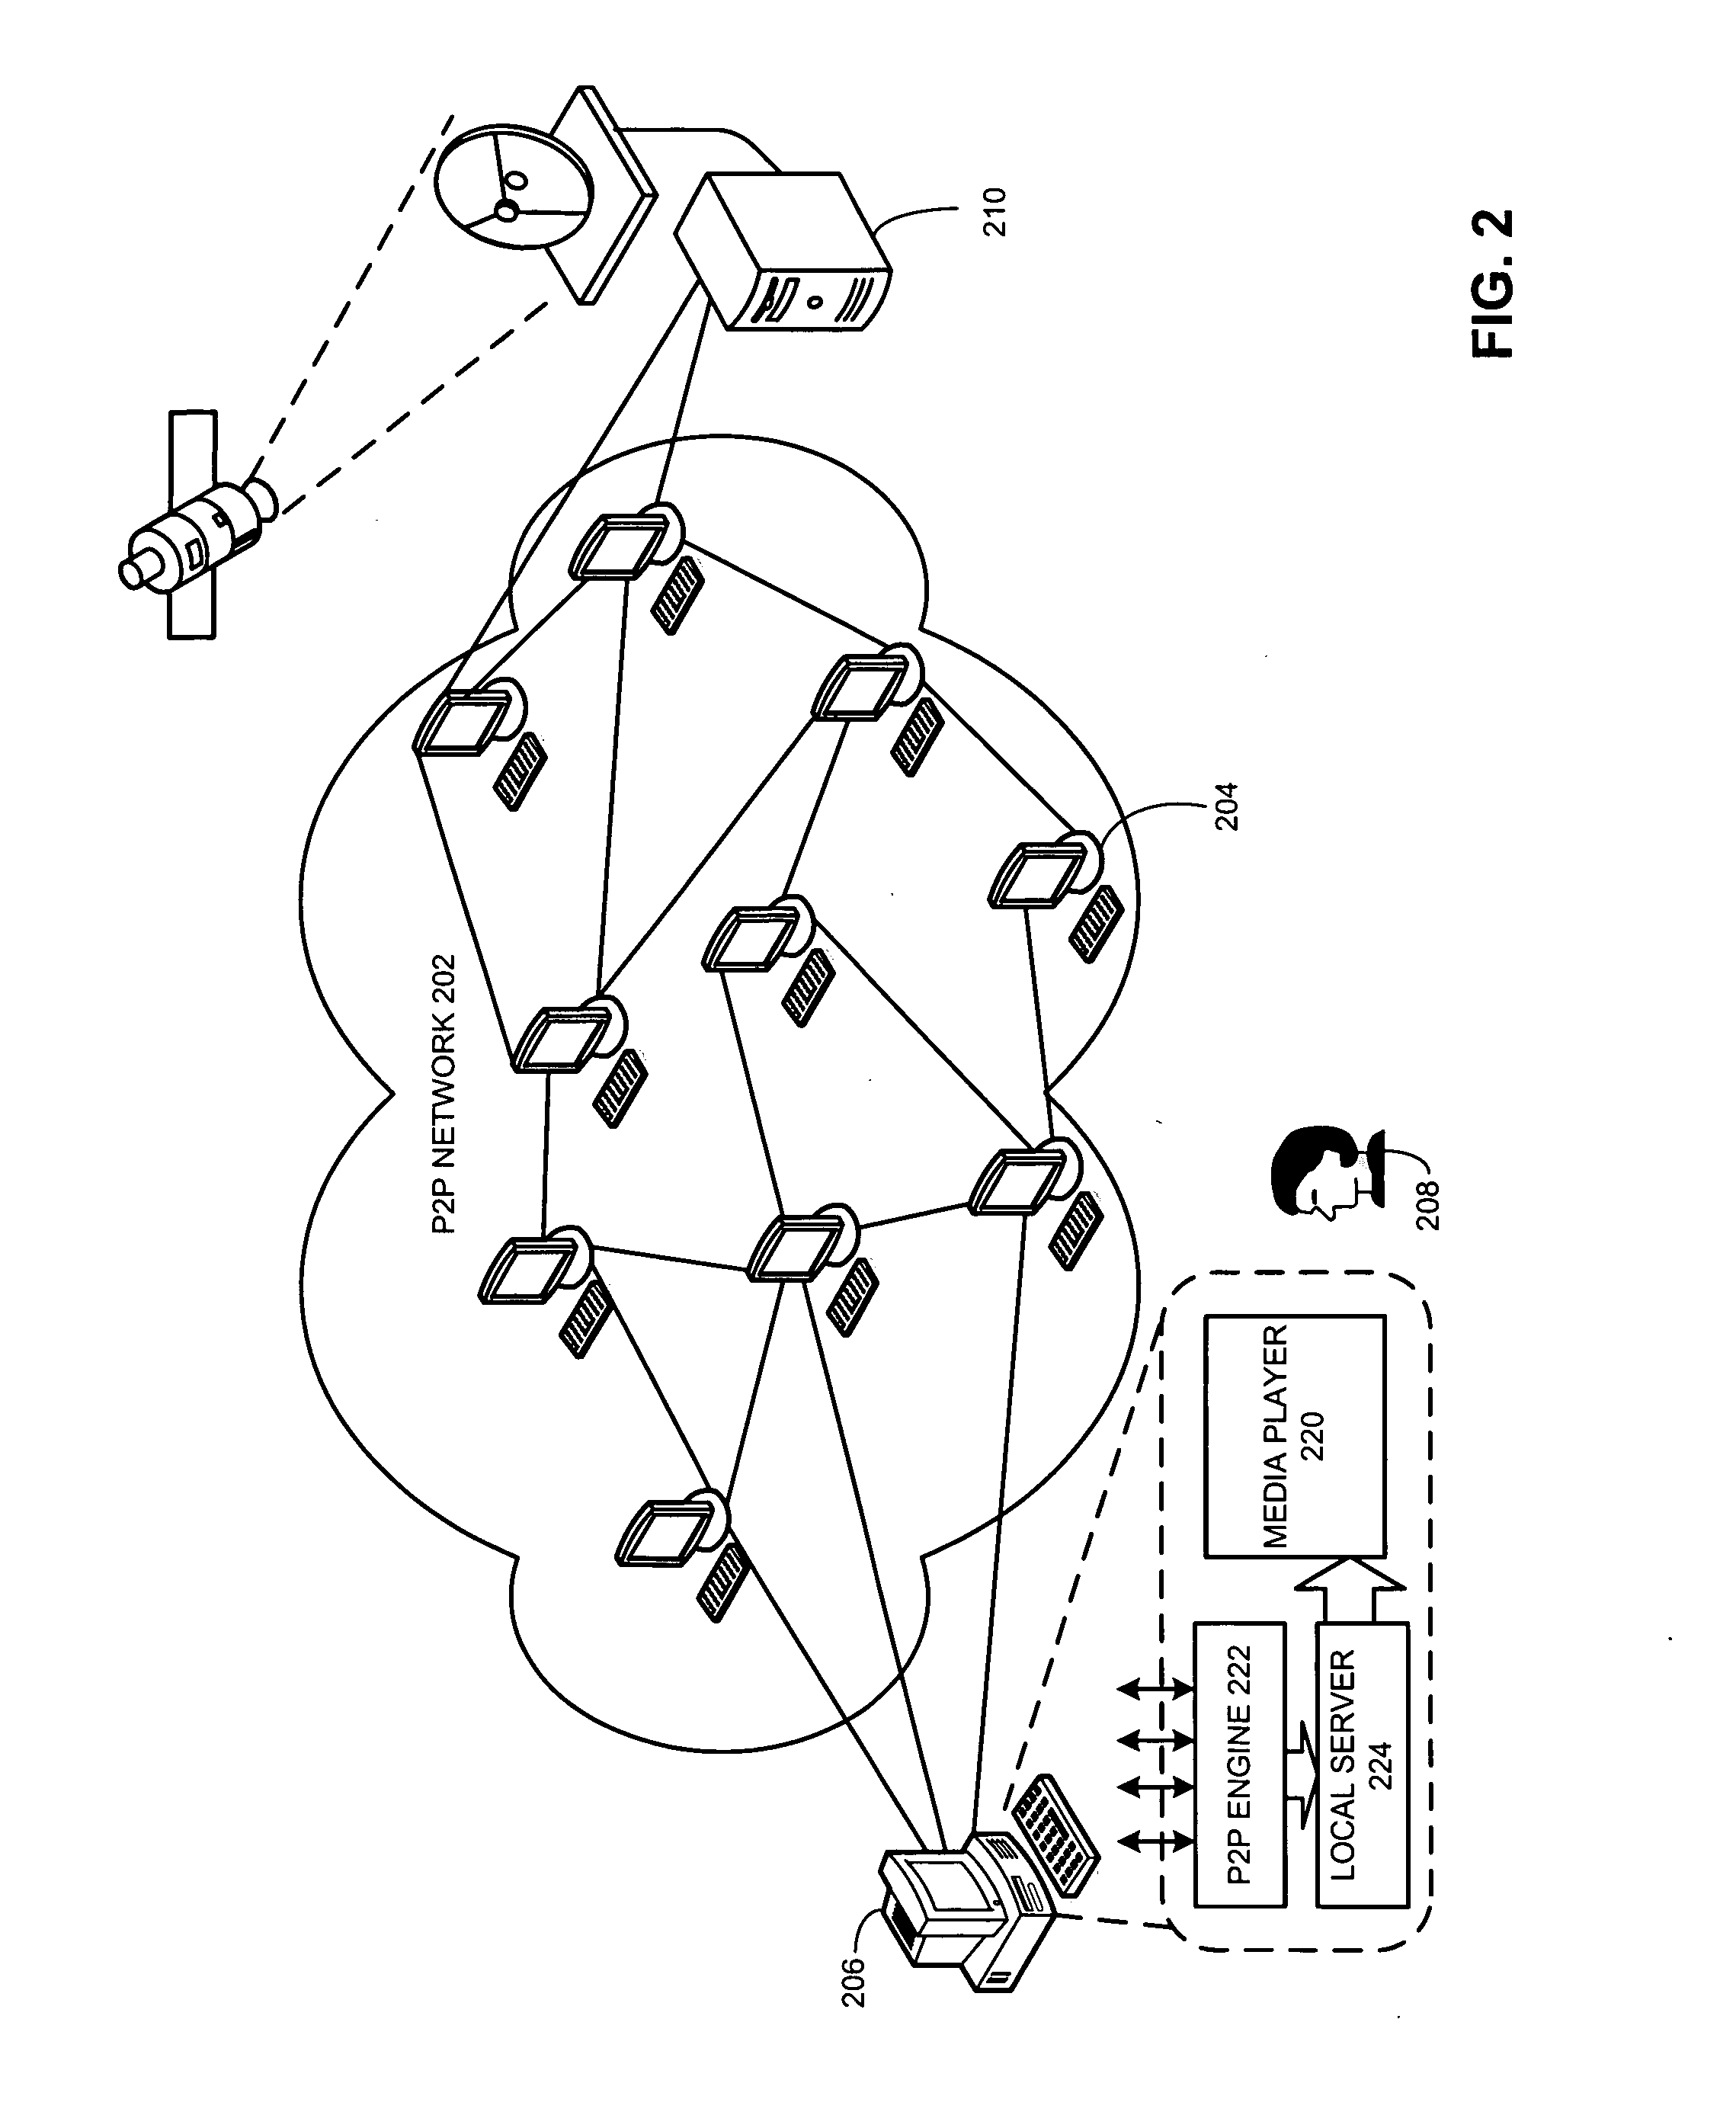 System and method for presenting streaming media content